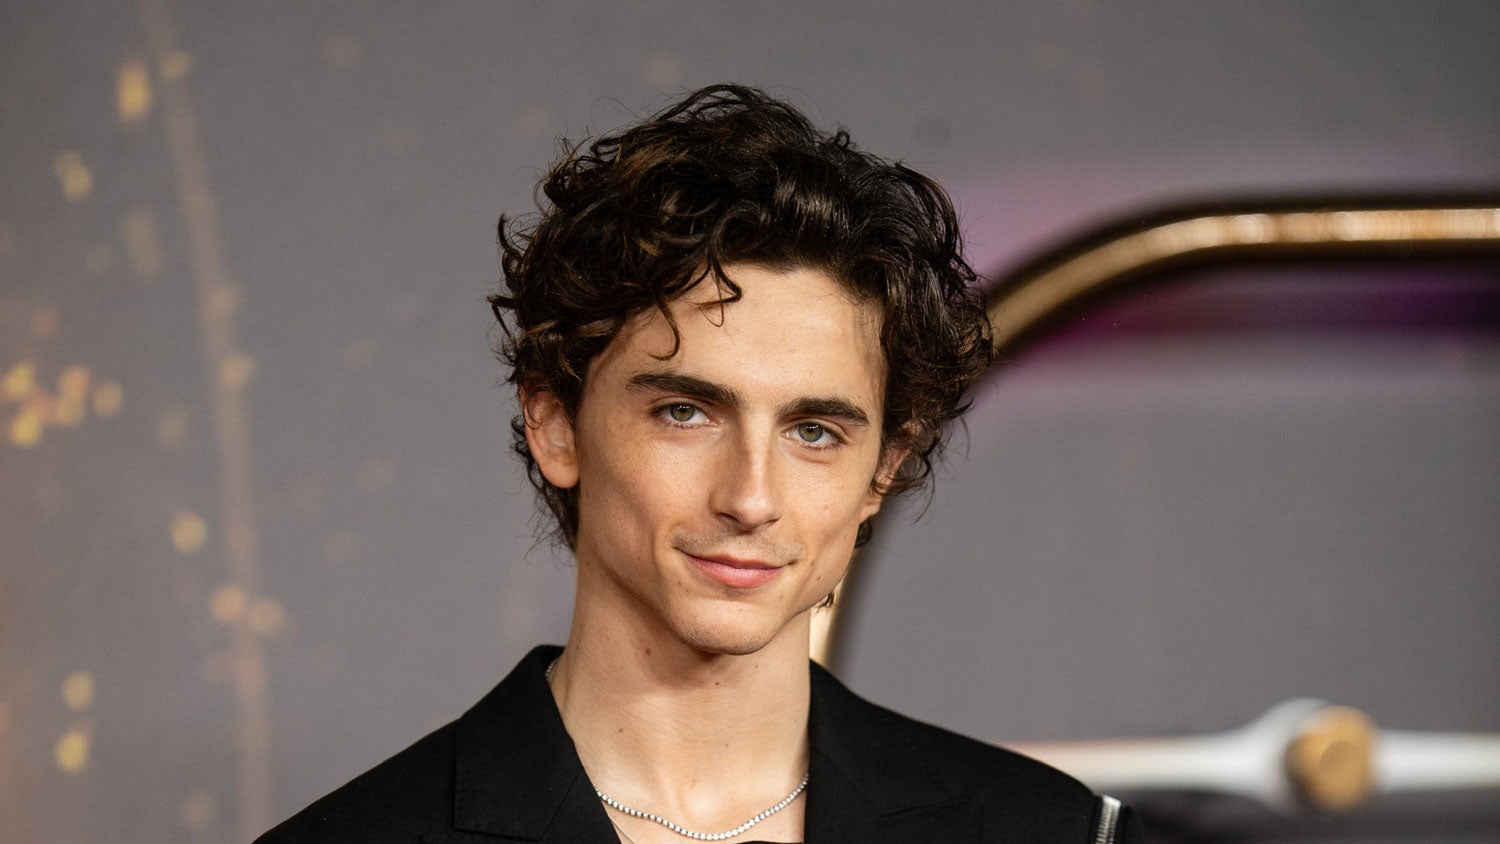 This Is How You Get Hair to Look Like Timothée Chalamet's